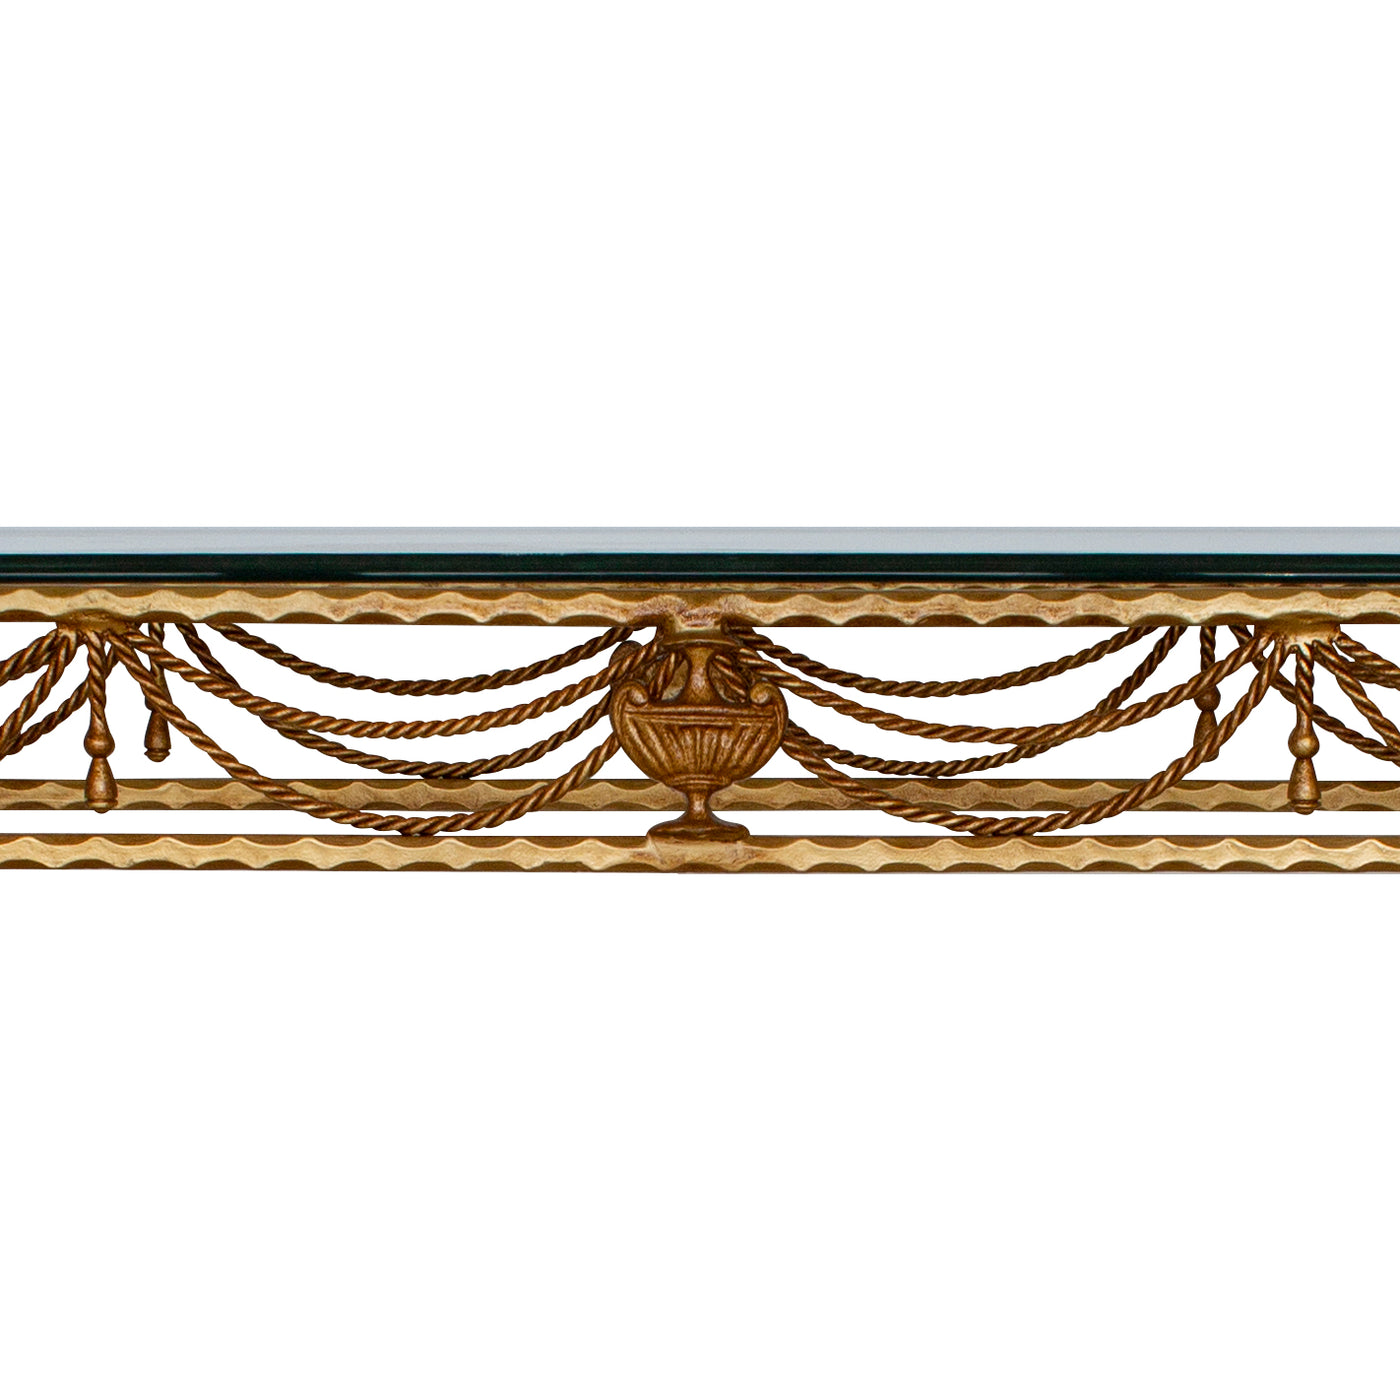 Close up of a classical wrought iron console comprised of twisted rope painted in an antique golden finish, topped with clear glass